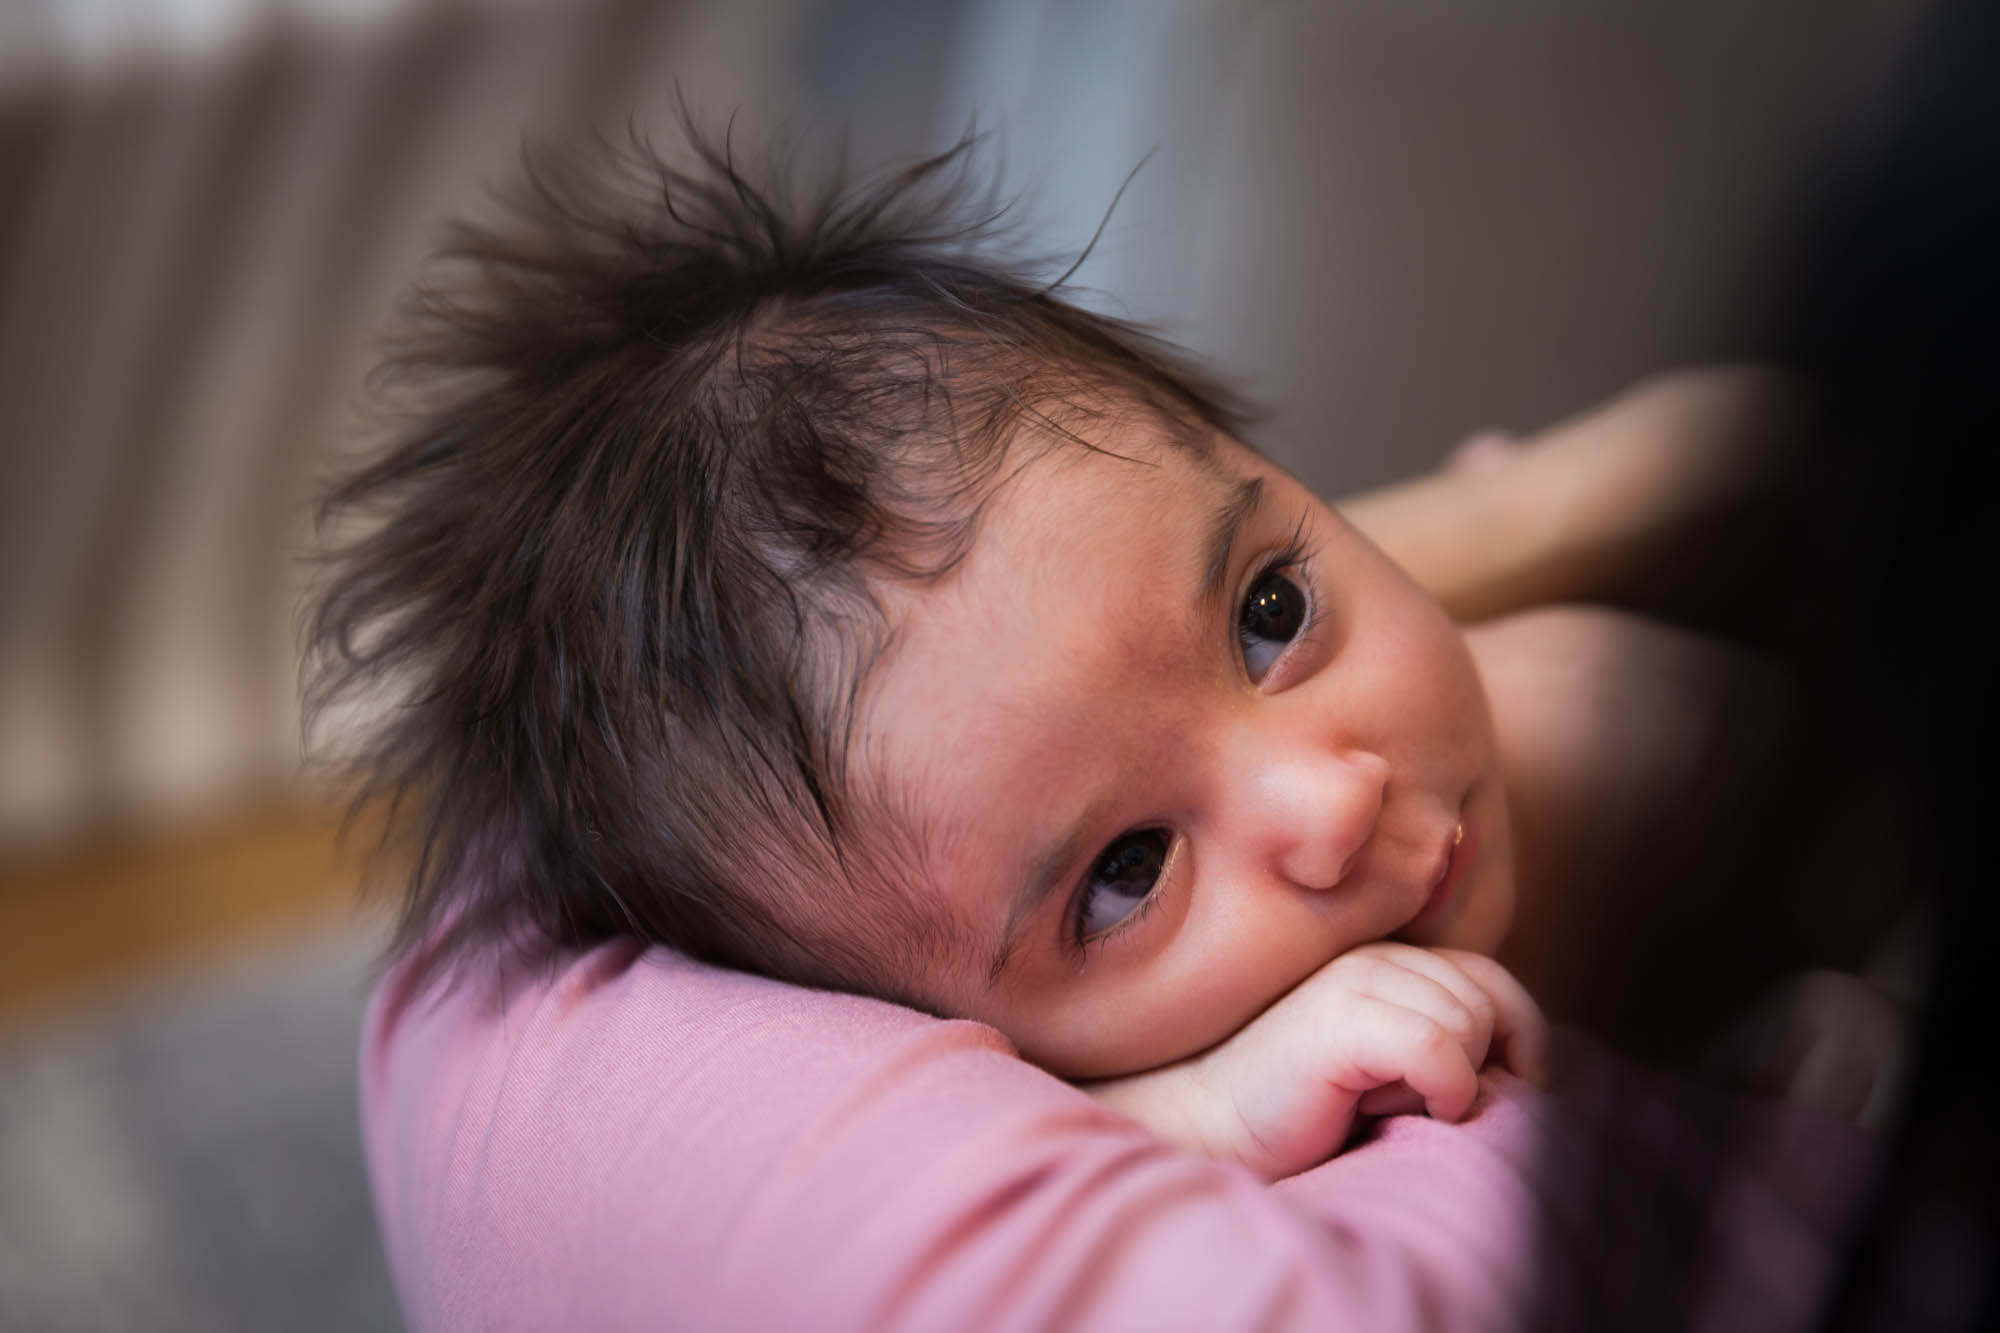 Newborn baby with wild hair looking up at mother